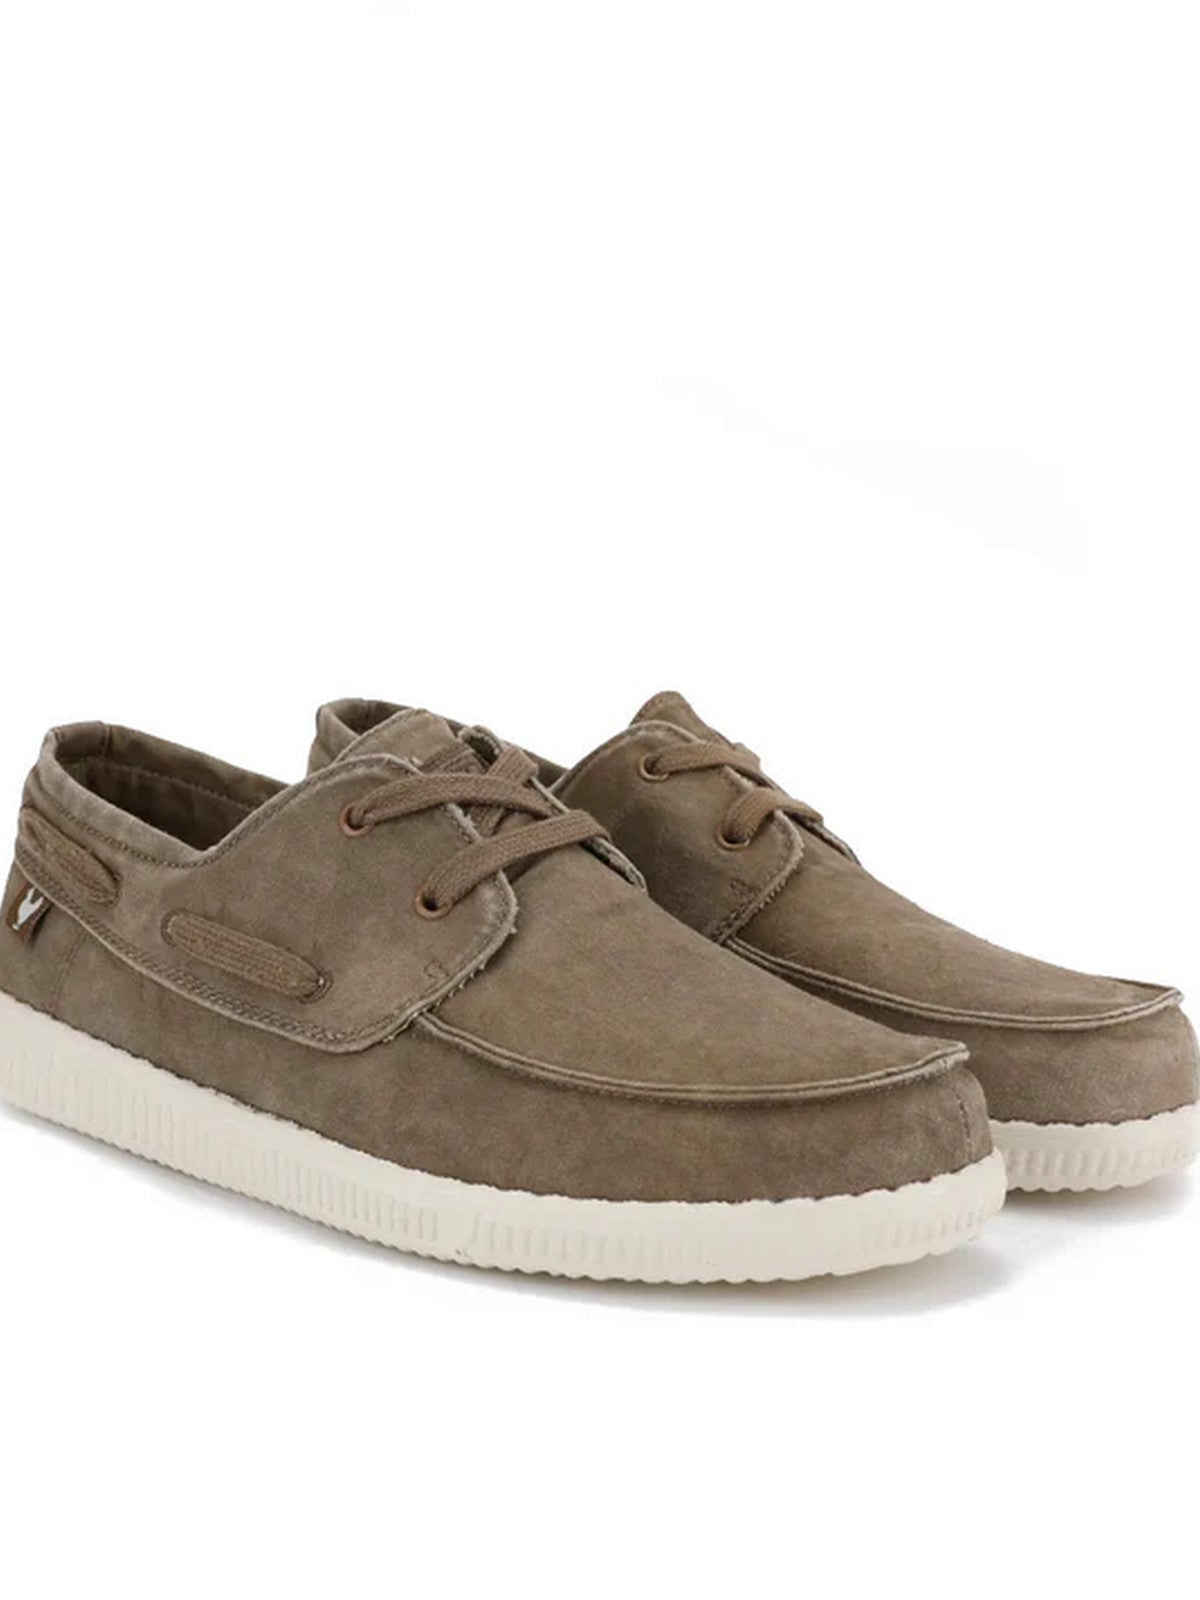 PITAS Mocassin Homme WP150 BOAT TAUPE Marron